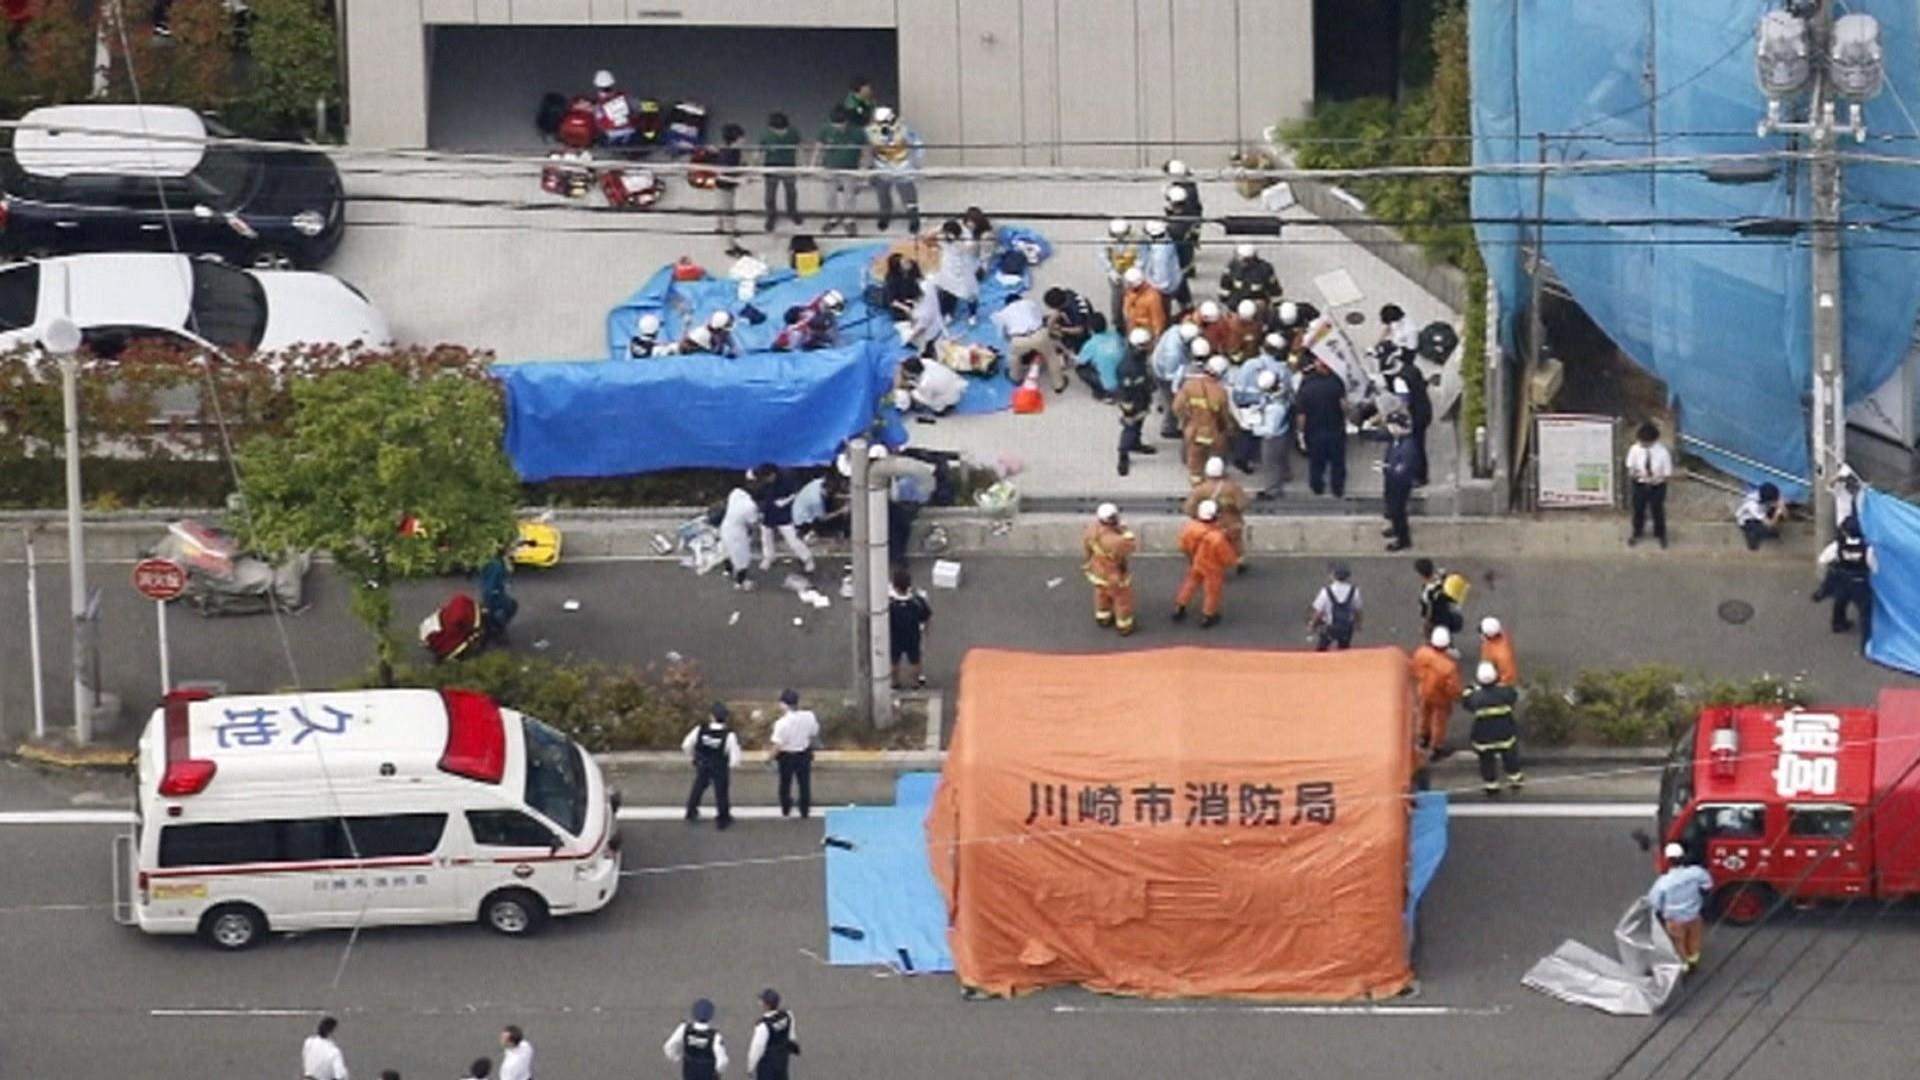 Many Students Injured in Japan Knife Attack